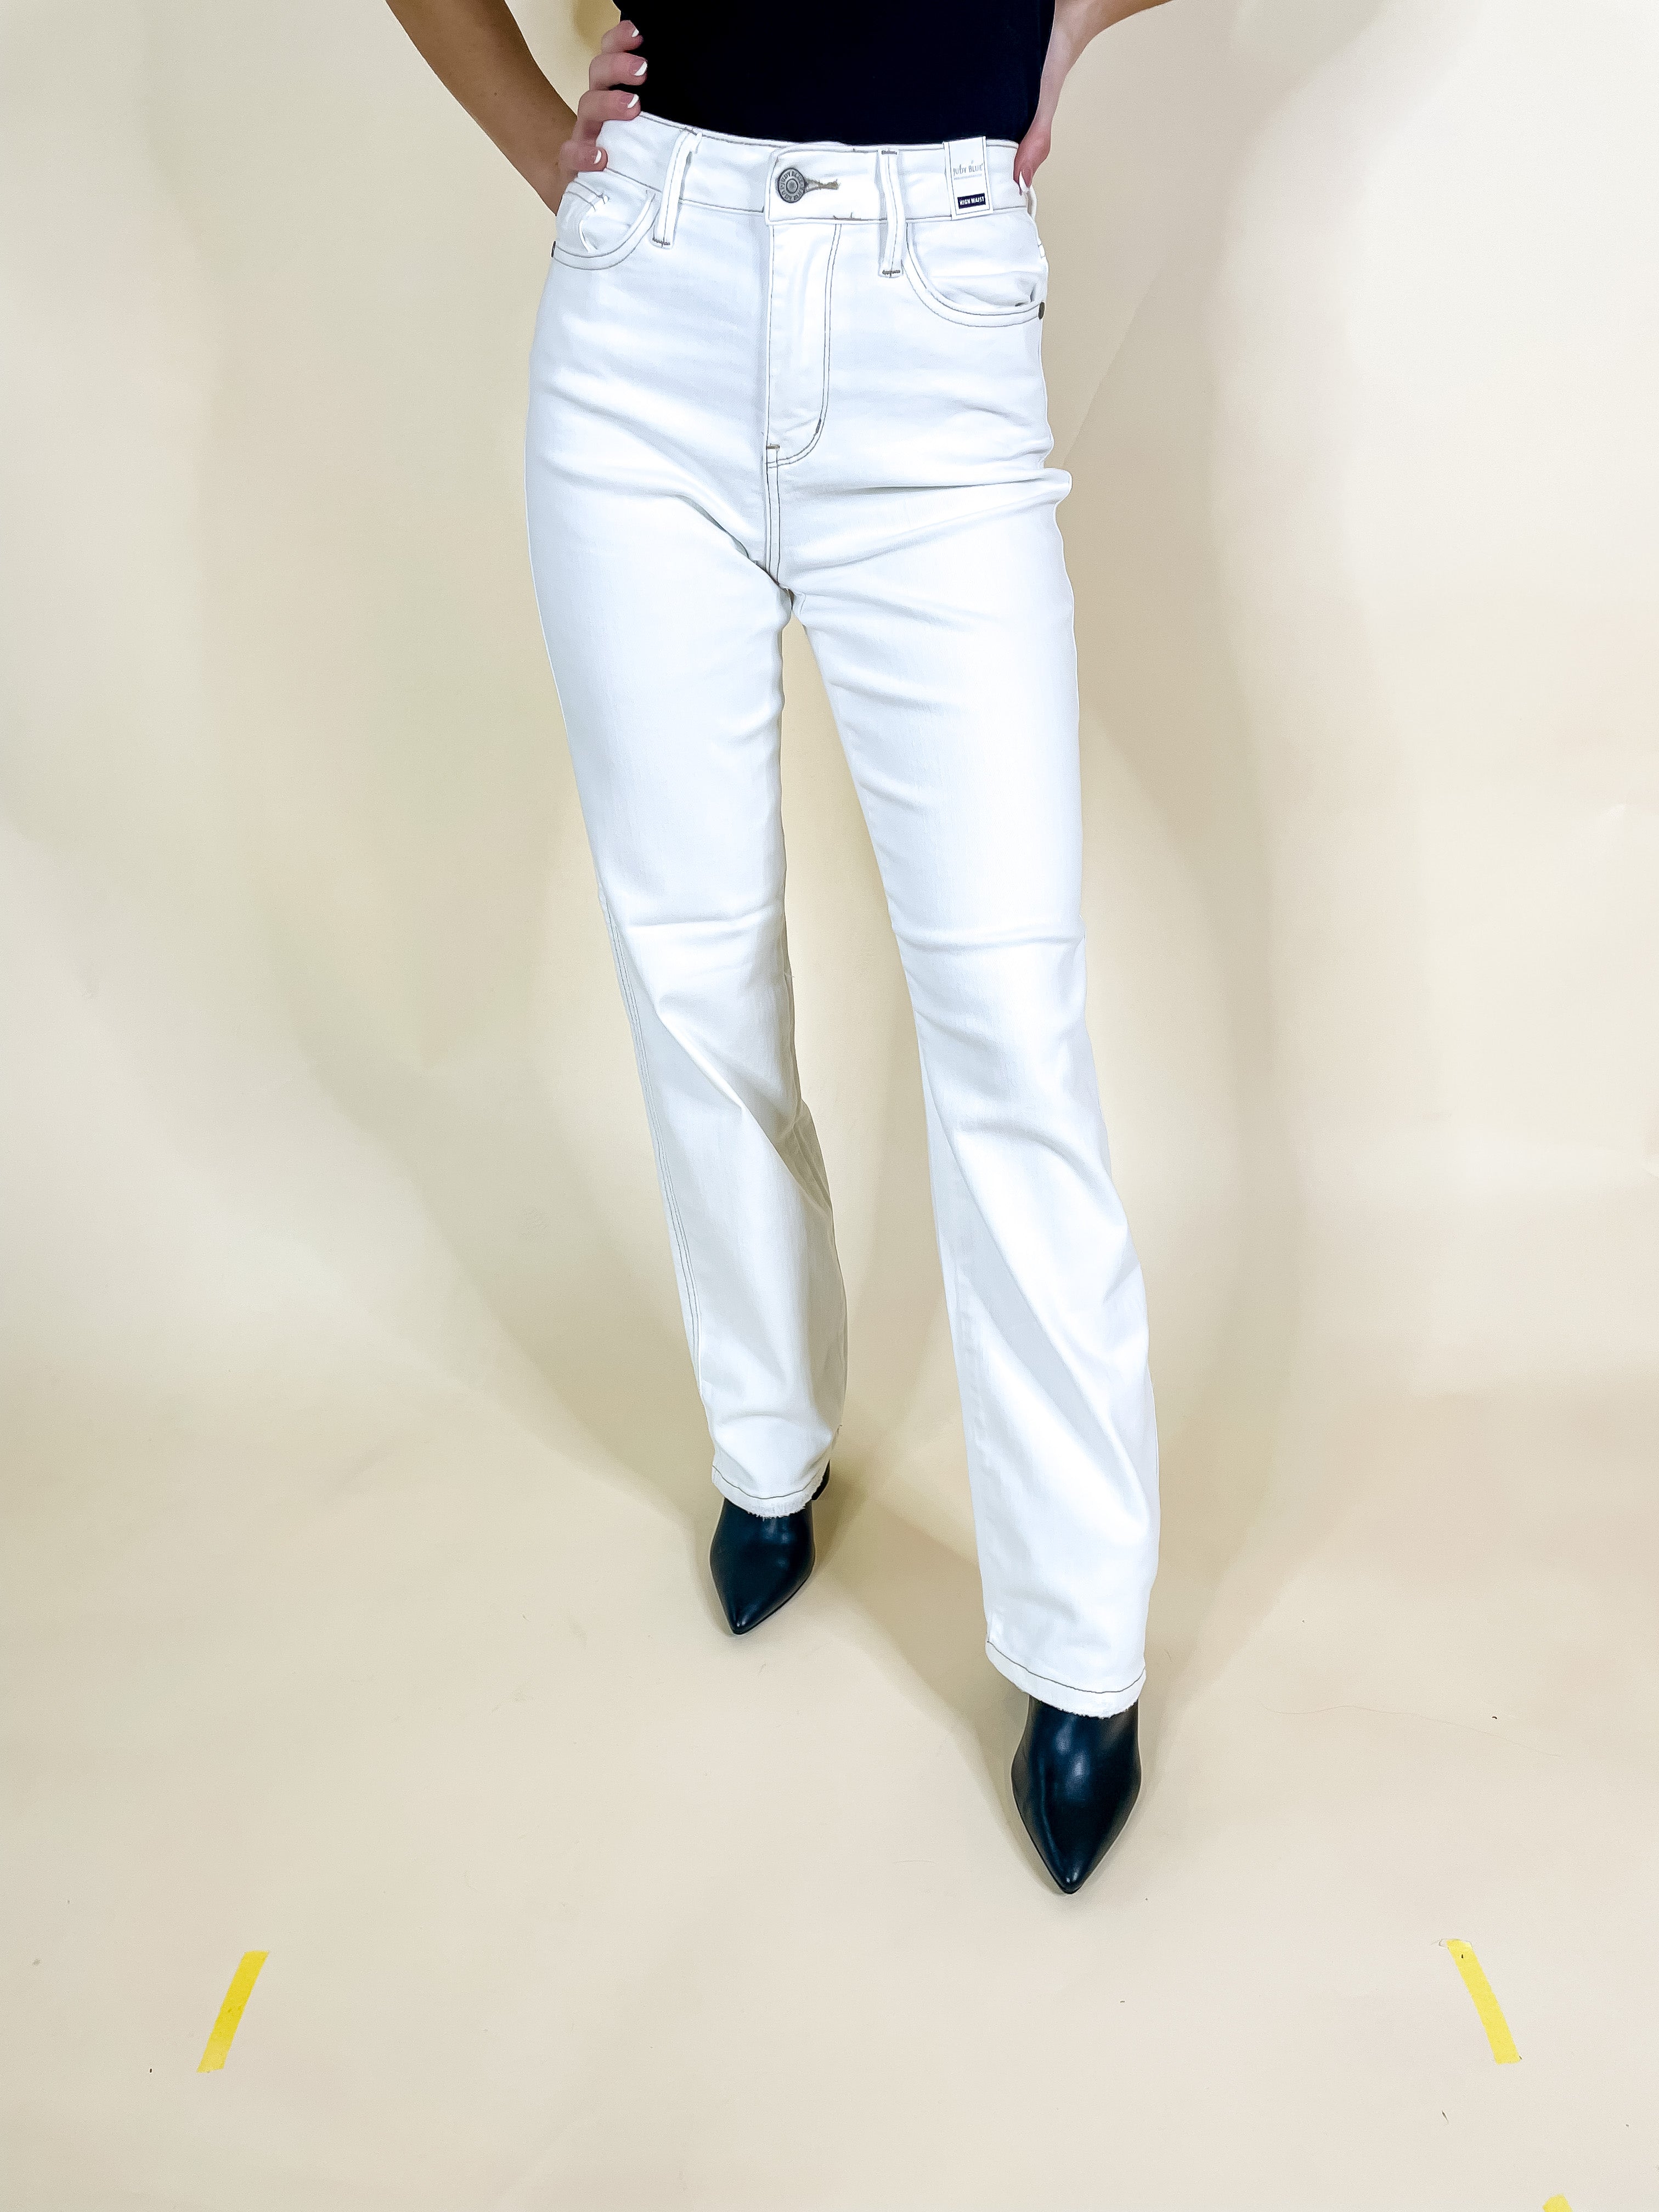 Judy Blue | Feeling My Best Straight Leg Jeans in Ecru - Giddy Up Glamour Boutique